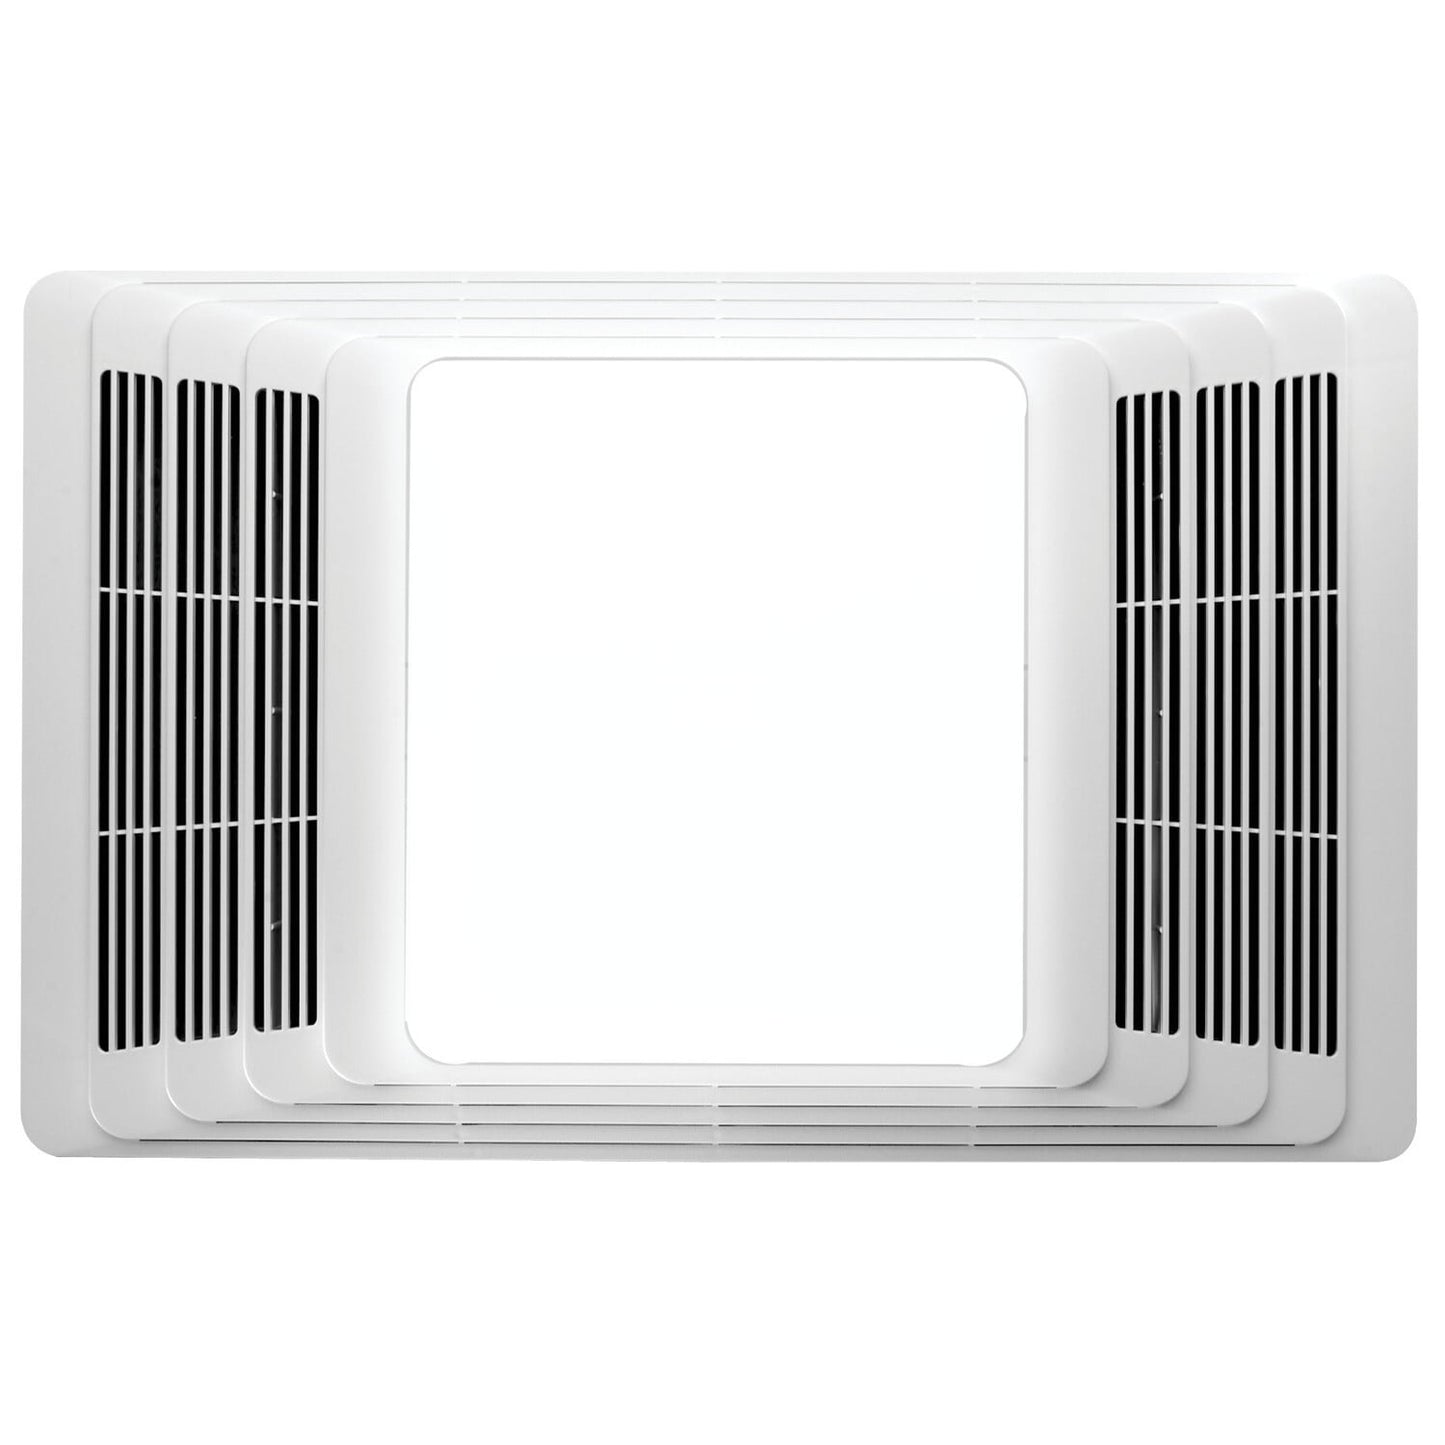 Broan 655 Broan-Nutone® Wall Vent Kit, 3" Or 4" Round Duct